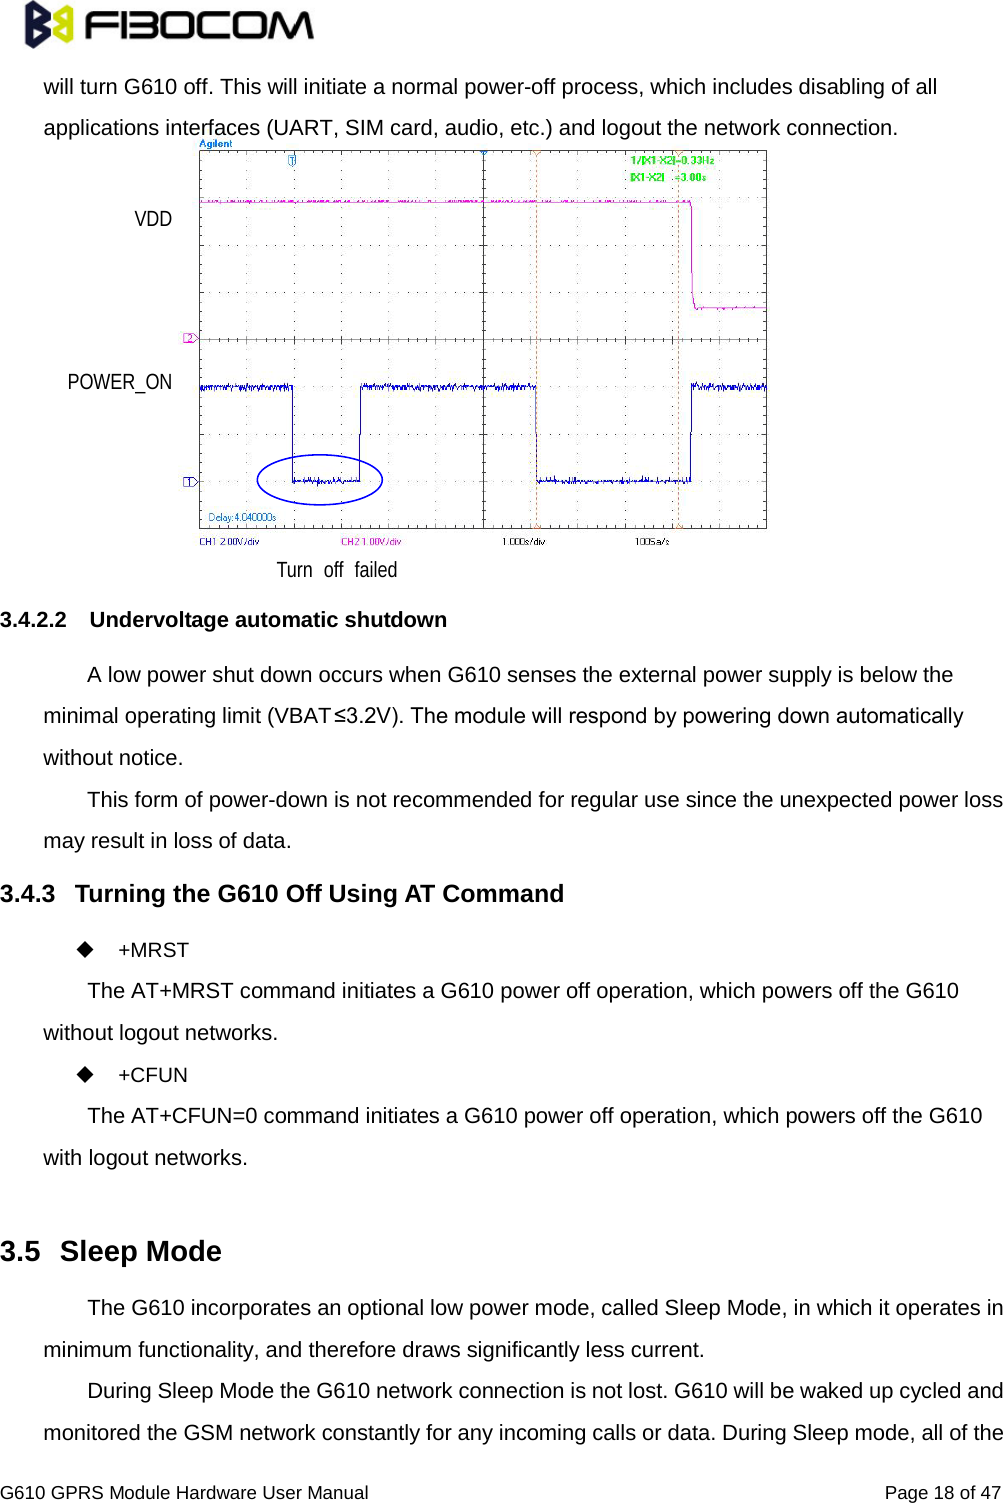                                                                                                          G610 GPRS Module Hardware User Manual                                                          Page 18 of 47  will turn G610 off. This will initiate a normal power-off process, which includes disabling of all applications interfaces (UART, SIM card, audio, etc.) and logout the network connection.             3.4.2.2 Undervoltage automatic shutdown A low power shut down occurs when G610 senses the external power supply is below the minimal operating limit (VBAT≤3.2V). The module will respond by powering down automatically without notice.   This form of power-down is not recommended for regular use since the unexpected power loss may result in loss of data.   3.4.3 Turning the G610 Off Using AT Command  +MRST   The AT+MRST command initiates a G610 power off operation, which powers off the G610 without logout networks.    +CFUN   The AT+CFUN=0 command initiates a G610 power off operation, which powers off the G610 with logout networks.    3.5 Sleep Mode   The G610 incorporates an optional low power mode, called Sleep Mode, in which it operates in minimum functionality, and therefore draws significantly less current.   During Sleep Mode the G610 network connection is not lost. G610 will be waked up cycled and monitored the GSM network constantly for any incoming calls or data. During Sleep mode, all of the VDD POWER_ON Turn off failed 